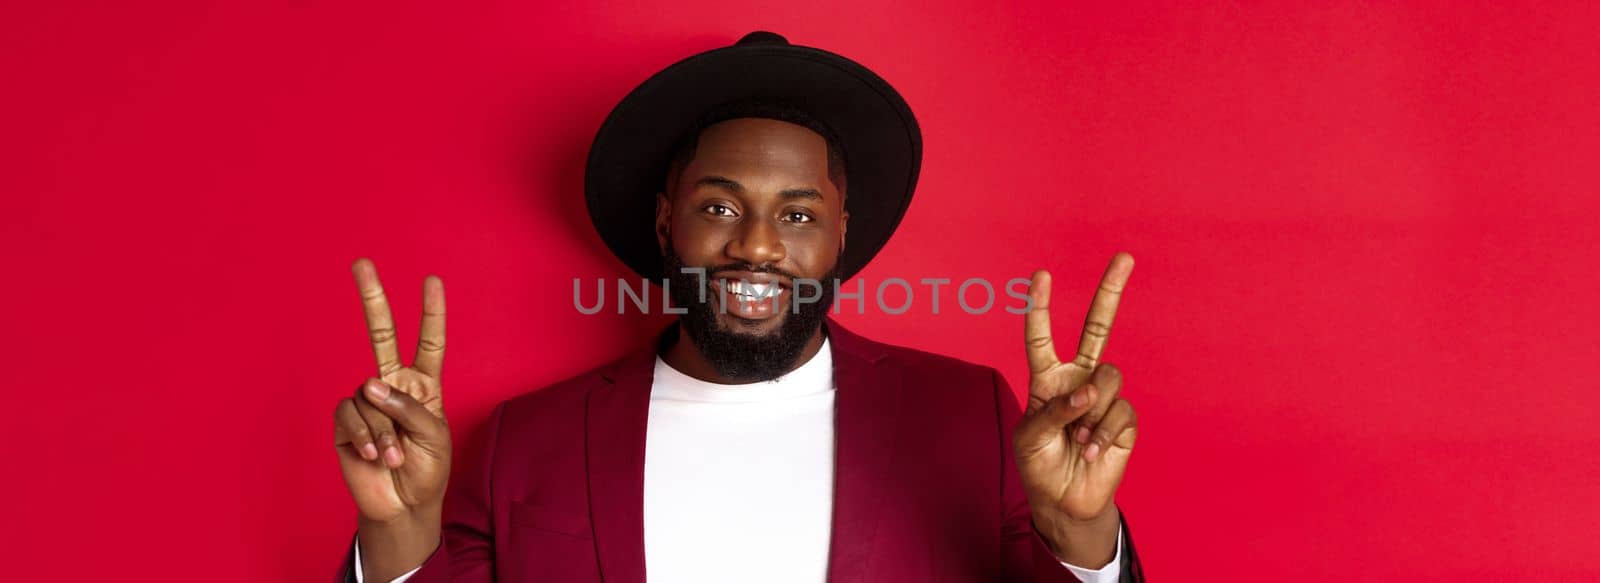 Close-up of handsome bearded Black man showing peace signs and smiling happy, posing for phoro, standing over red background.